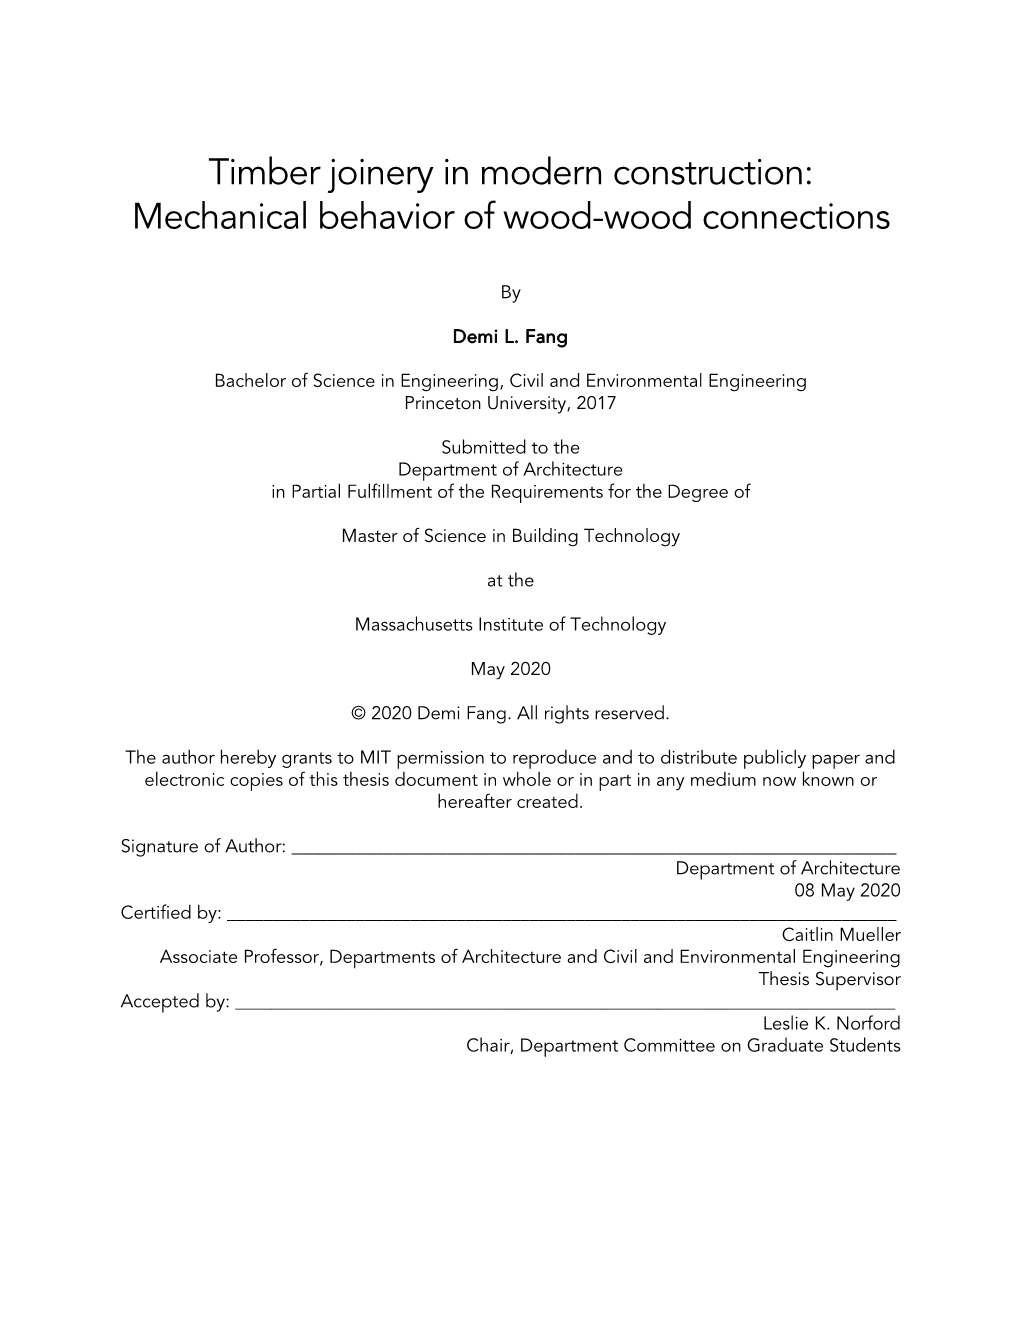 Timber Joinery in Modern Construction: Mechanical Behavior of Wood-Wood Connections